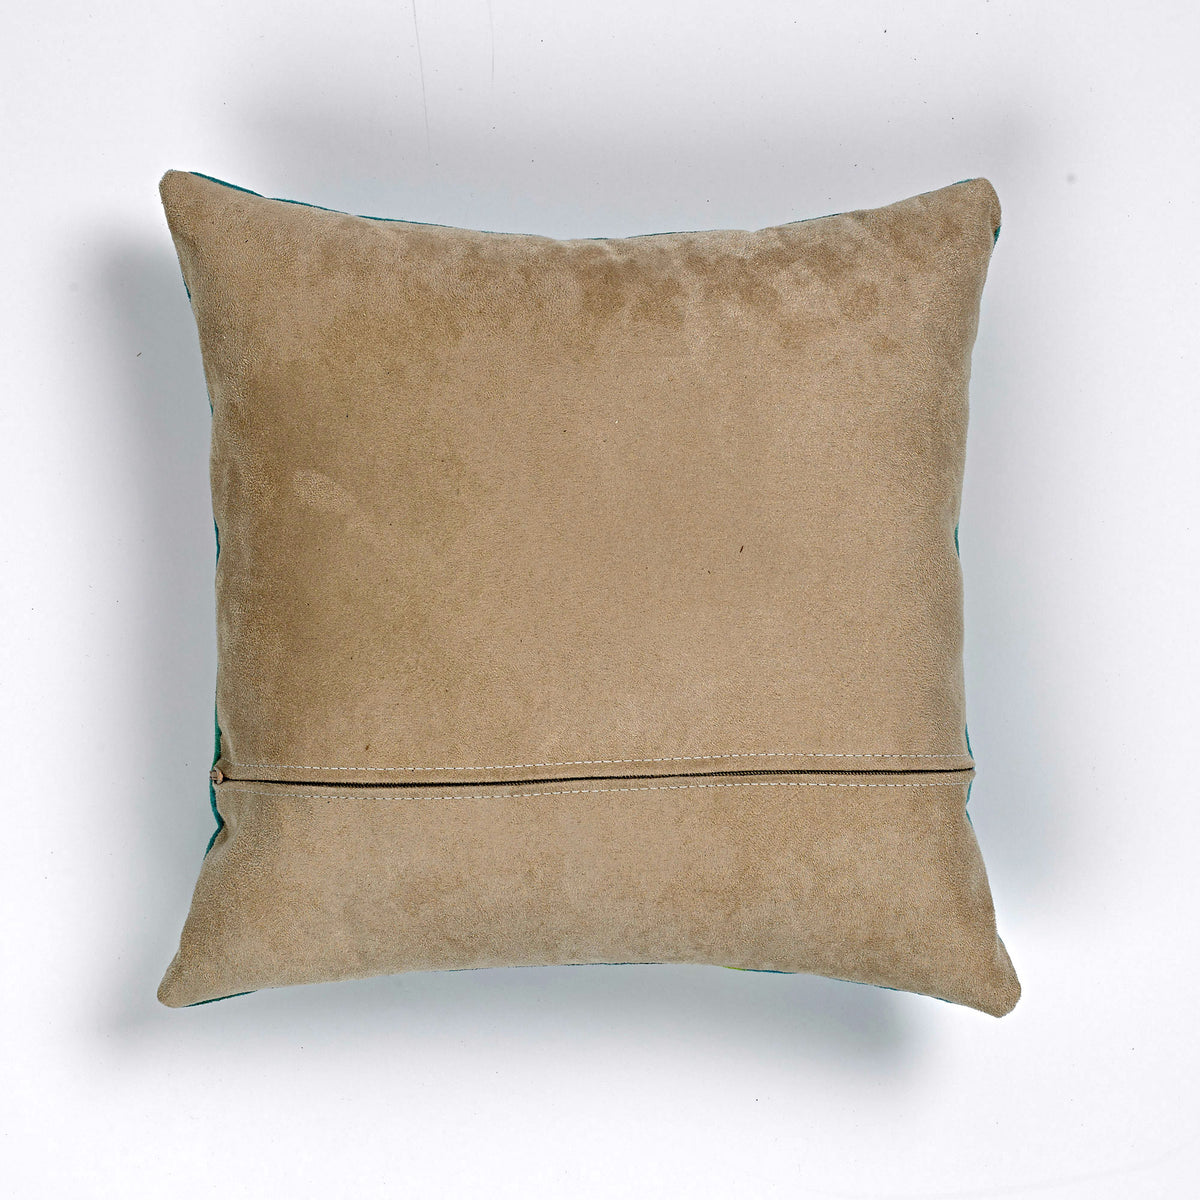 Suede cushion, reverse which is stone coloured